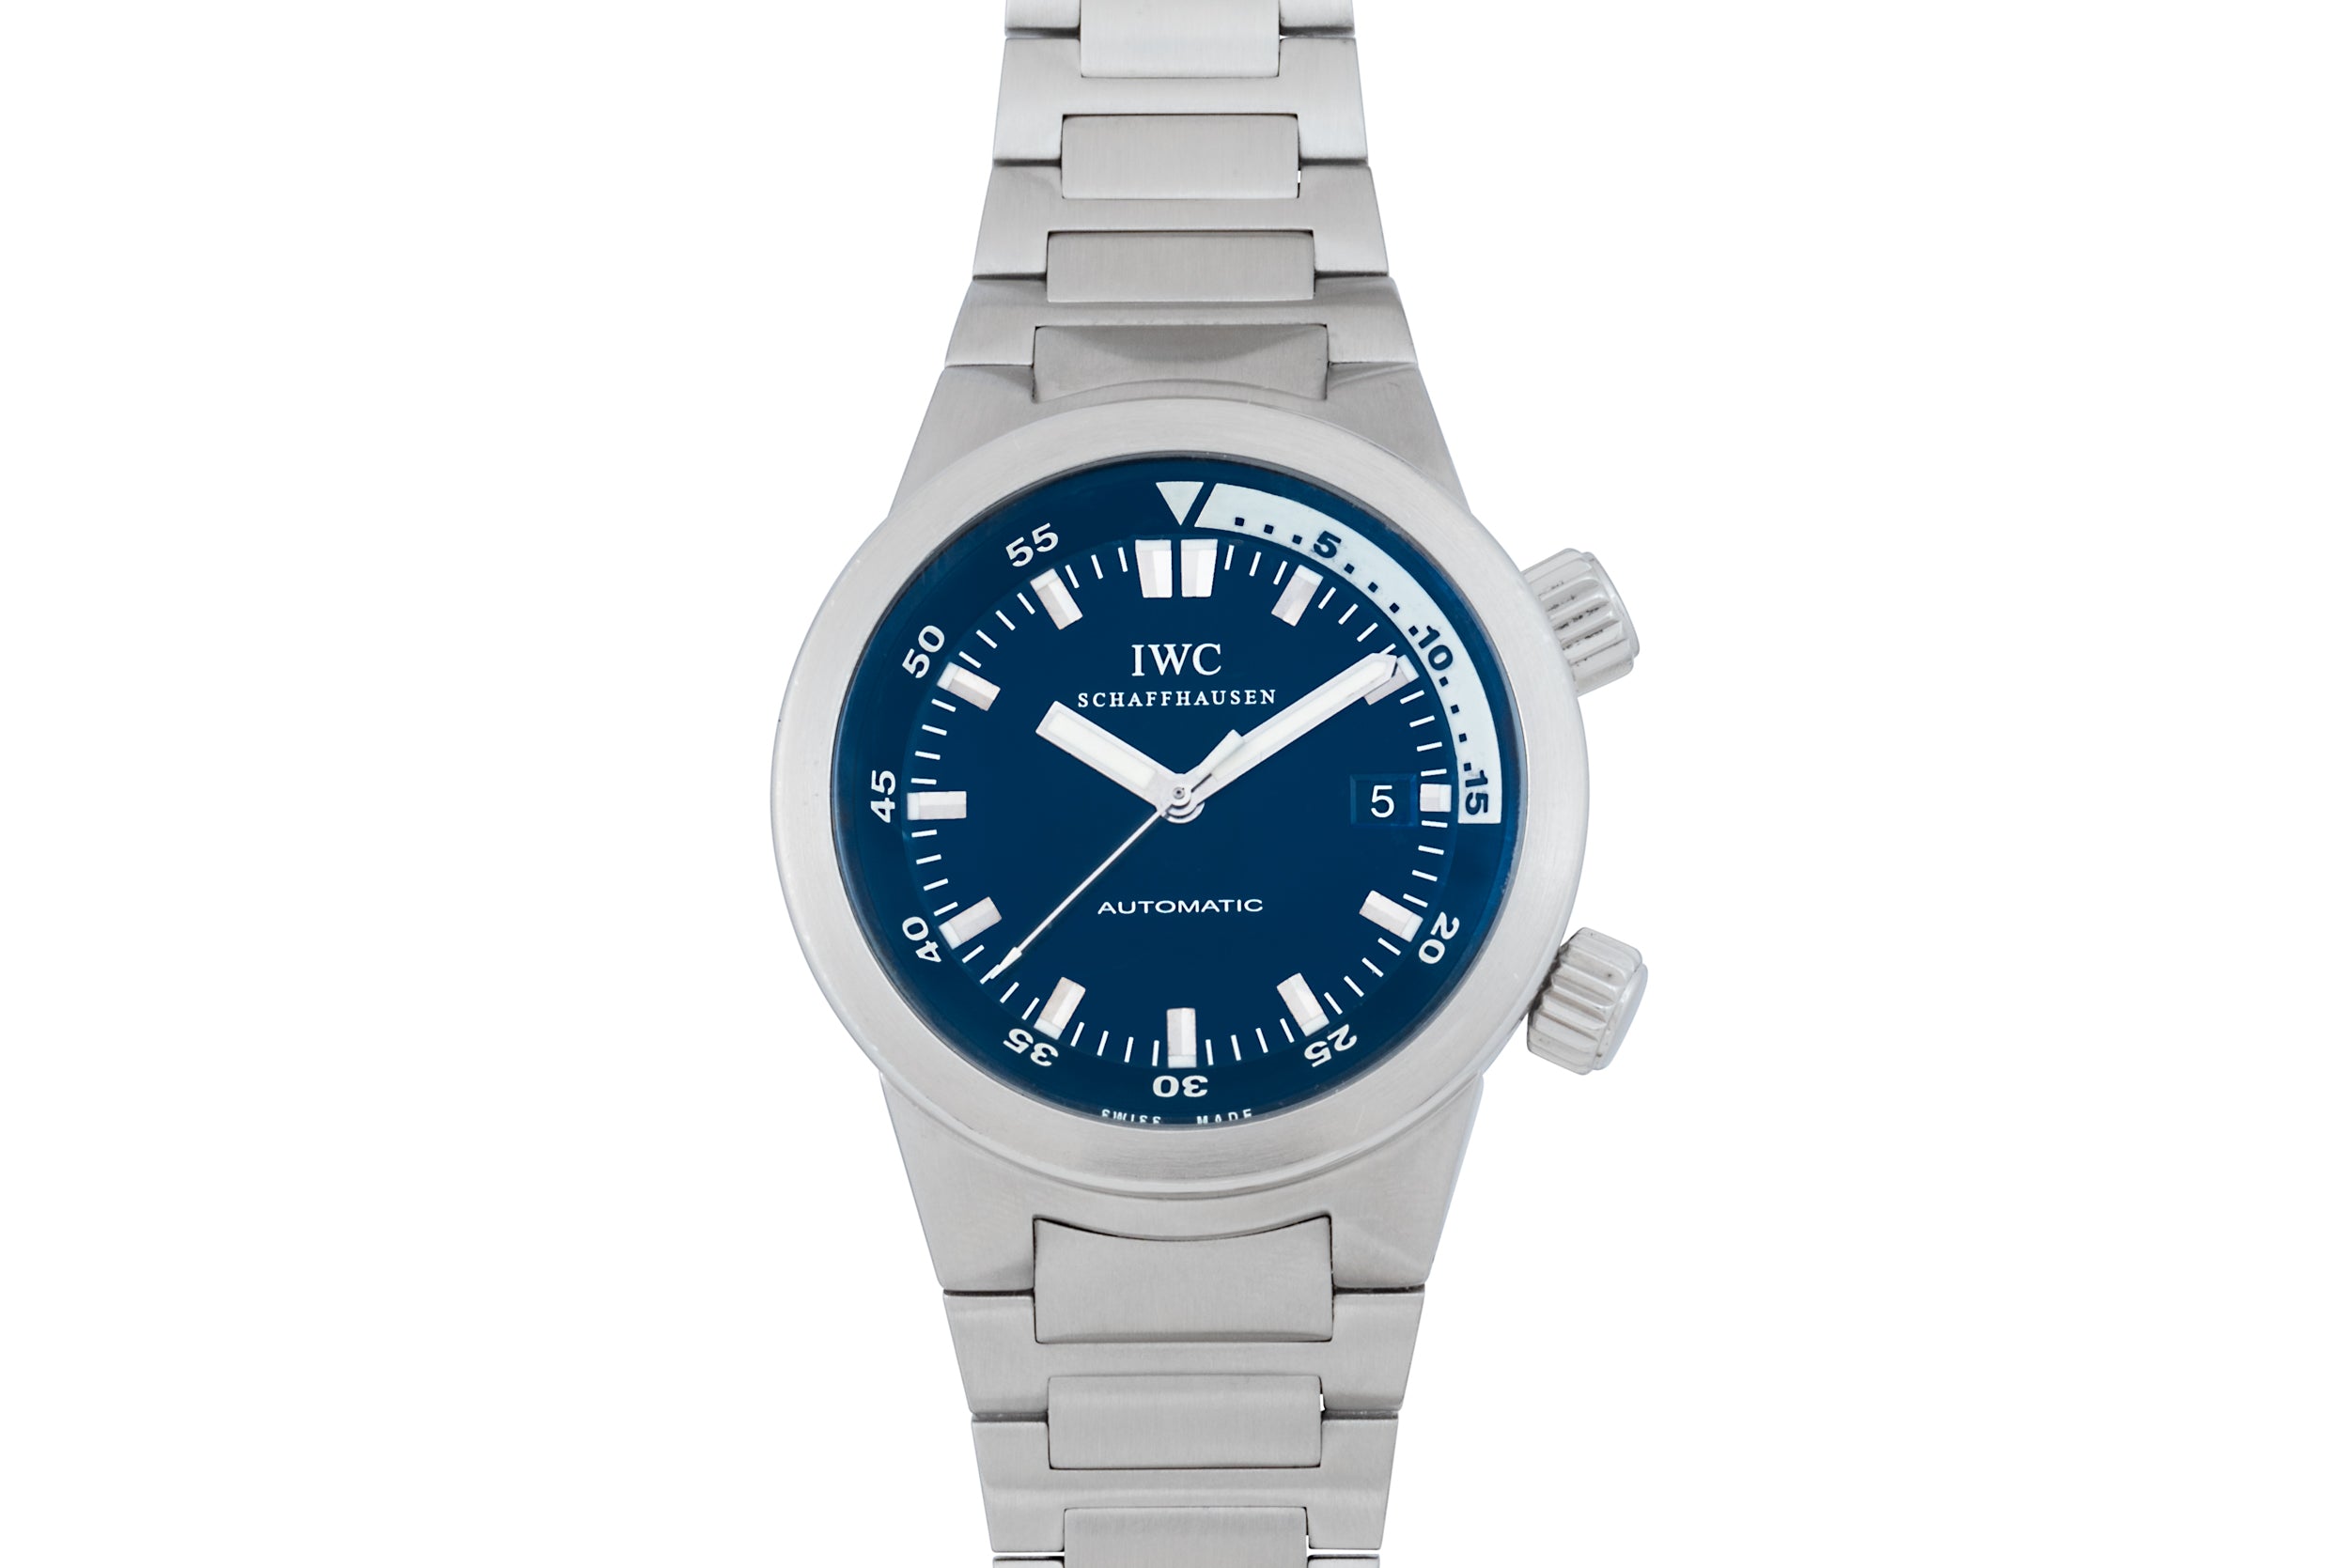 IWC SCHAFFHAUSEN Aquatimer Expedition Jacques-Yves Cousteau Automatic 42mm  Stainless Steel and Rubber Watch, Ref. No. IW329005 for Men | MR PORTER